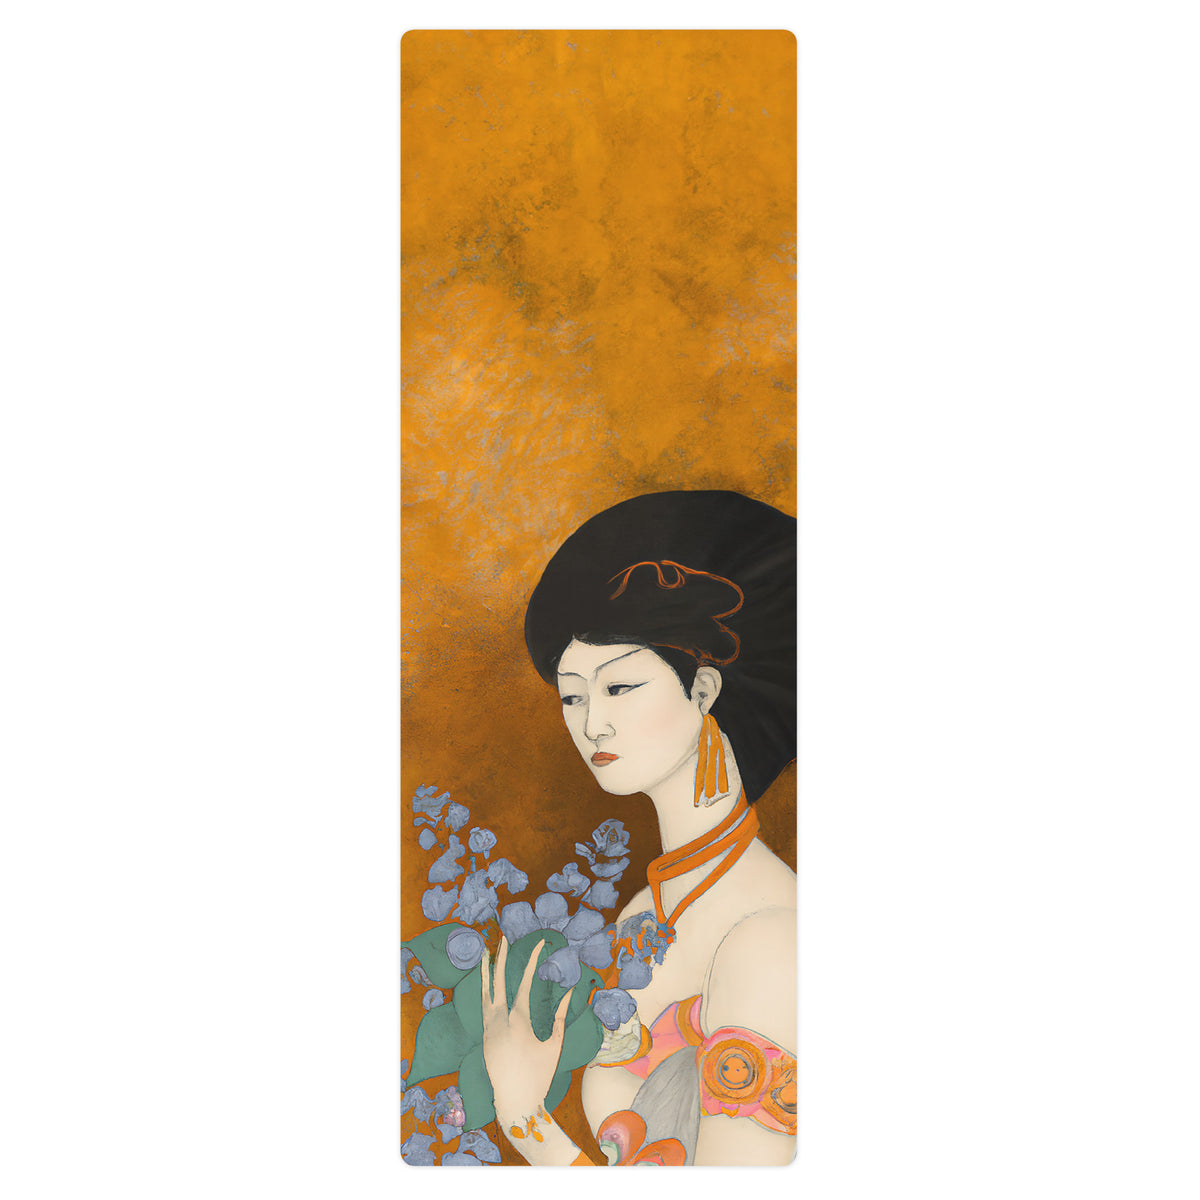 Yoga Mat with a painted image of a Geisha holding some violets